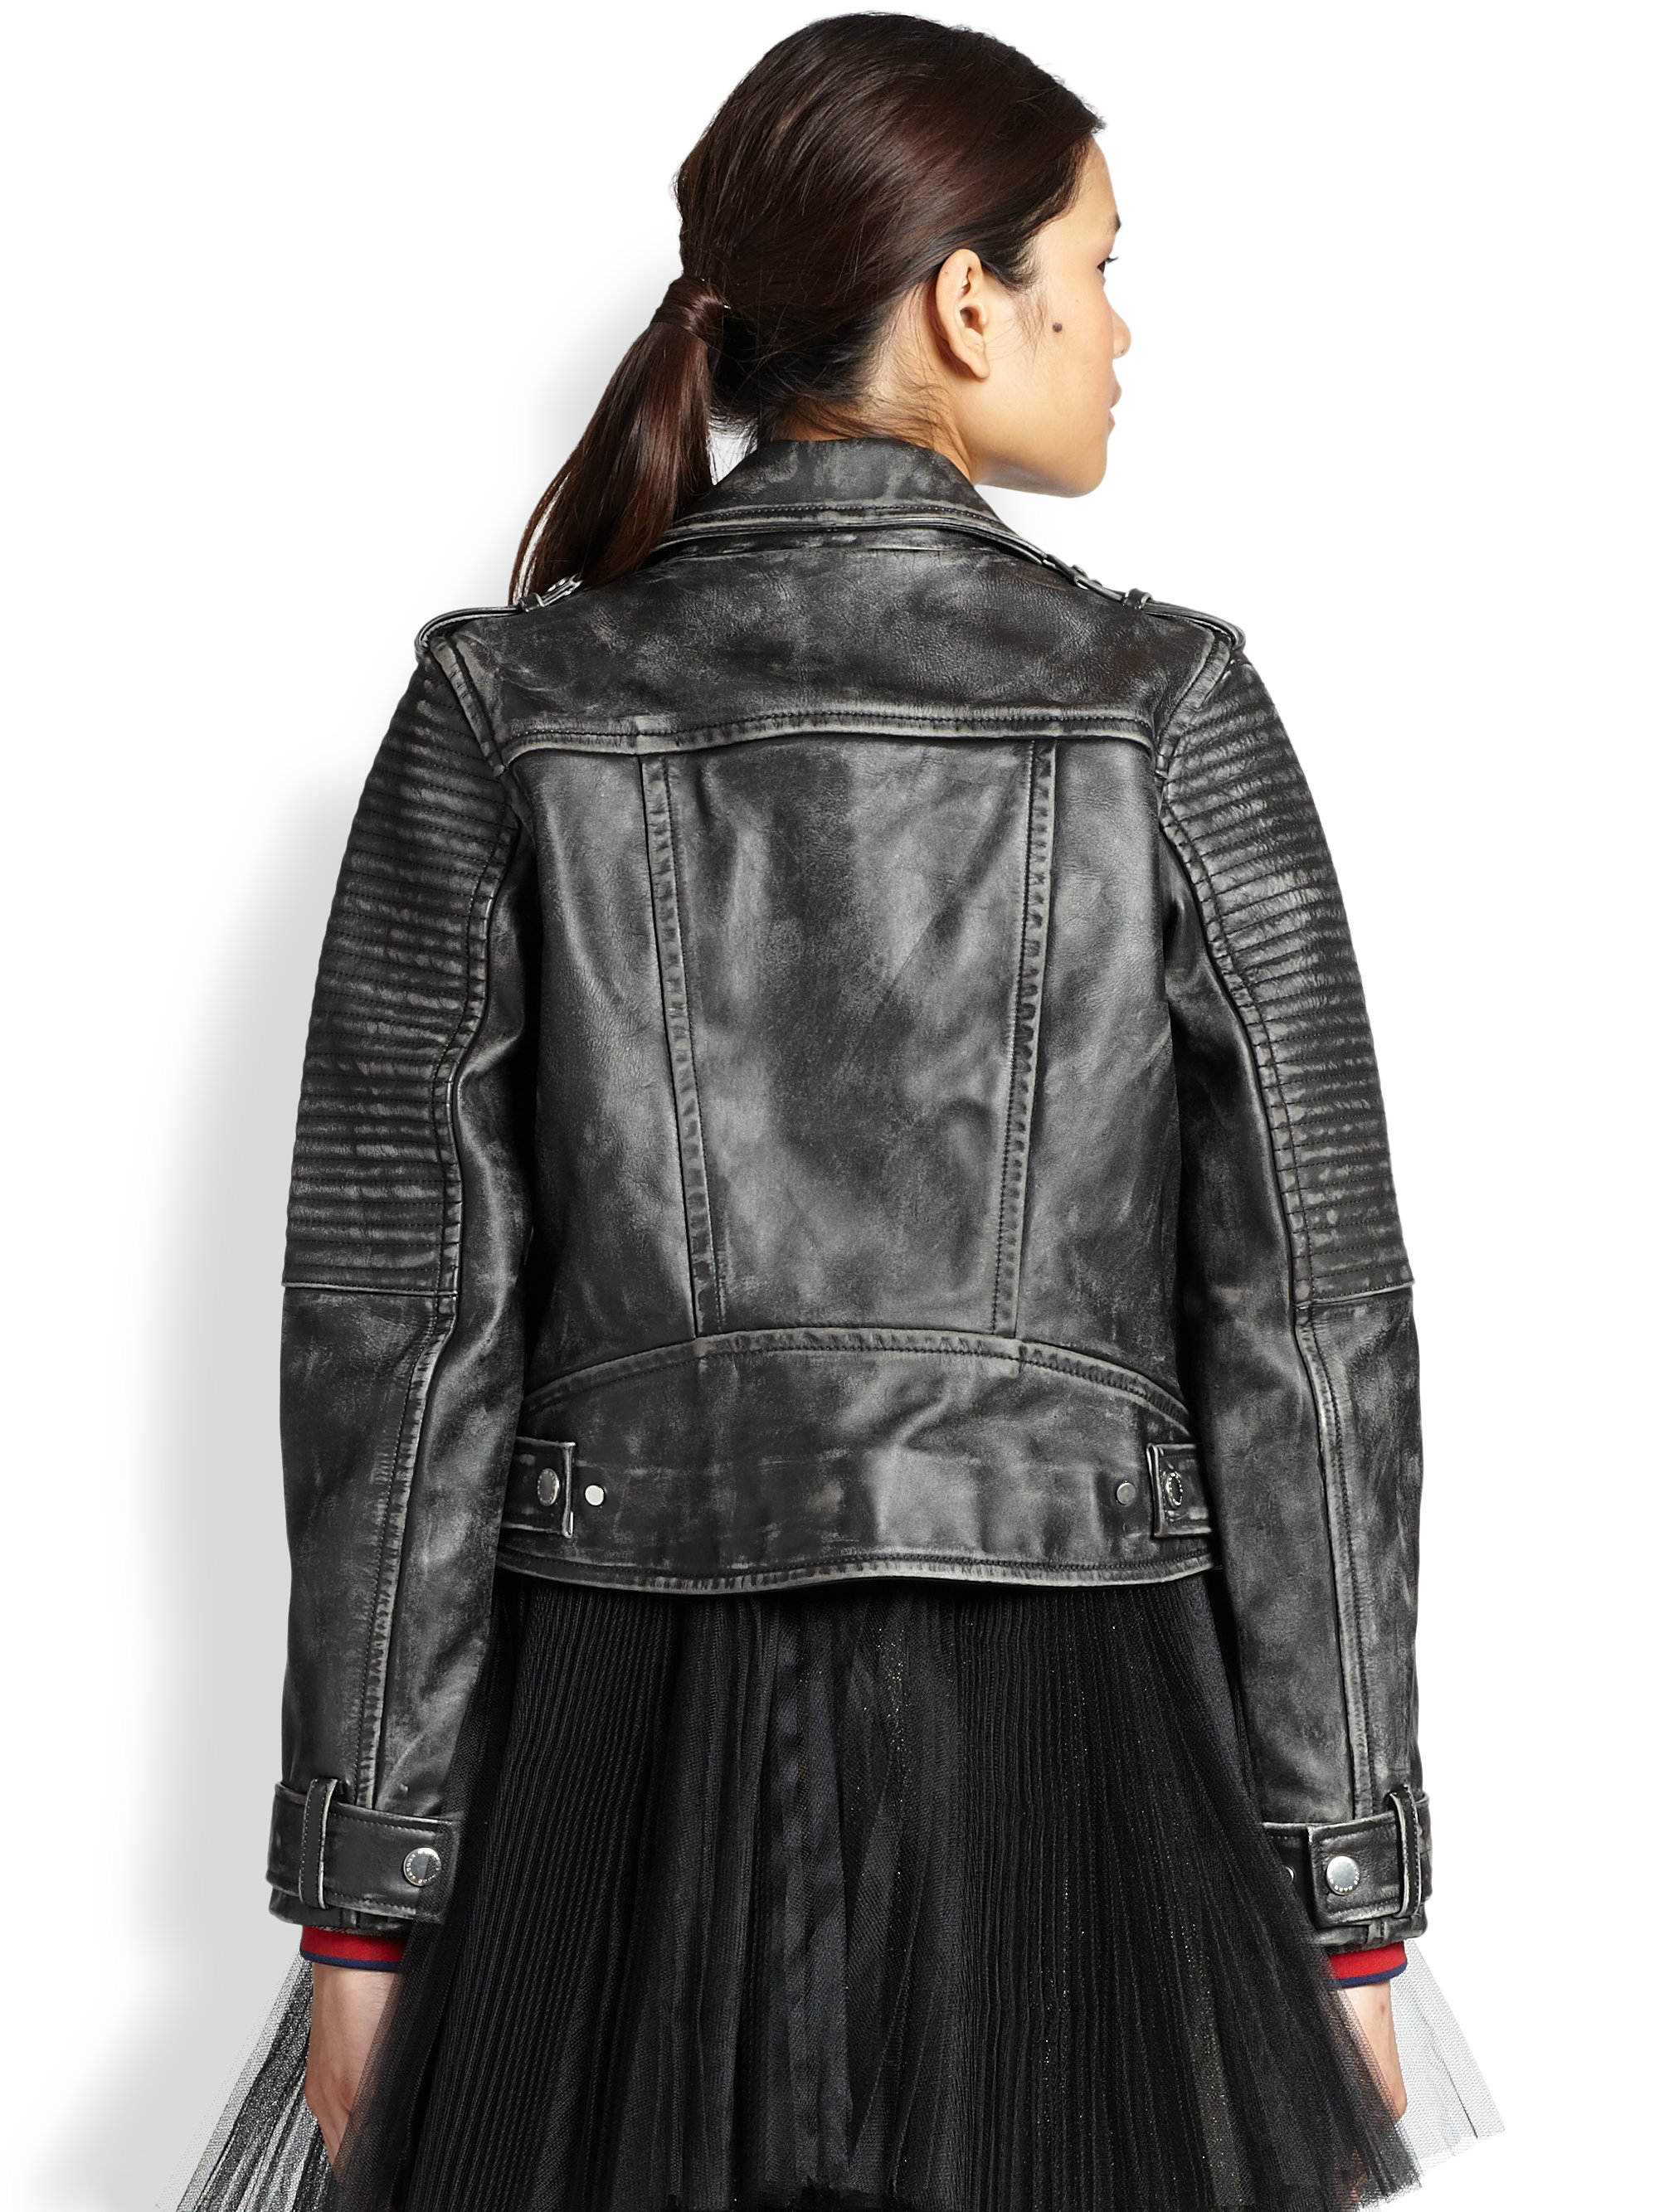 Marc By Marc Jacobs Distressed Leather Motorcycle Jacket in Black - Lyst